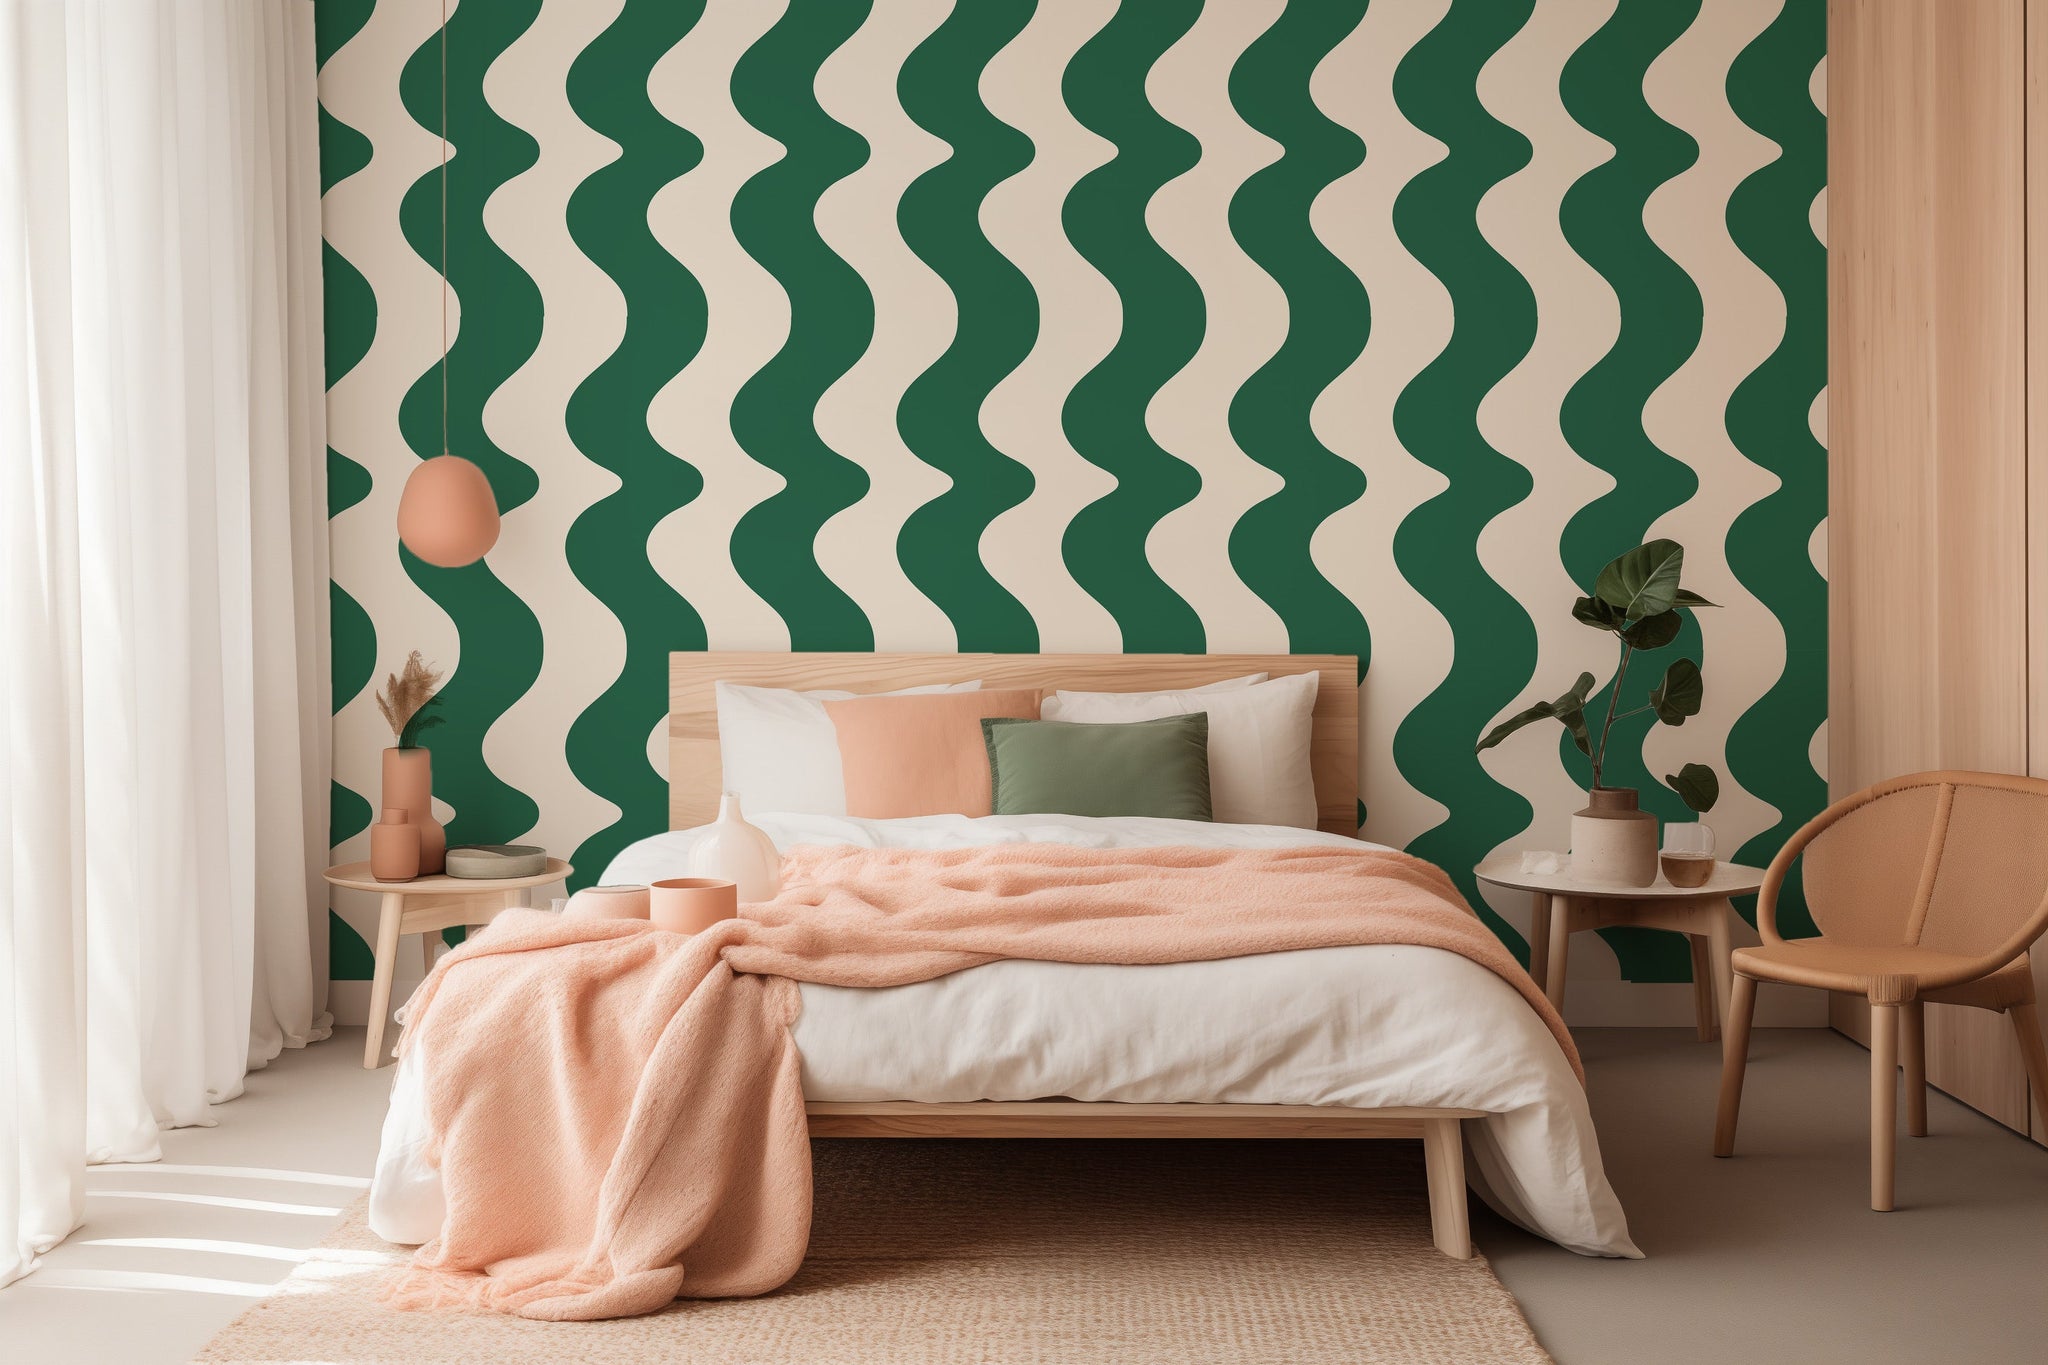 On The Same Wavelength Wallpaper in Forest Green | Wavy wallpaper in forest green colour - firstorganicbaby